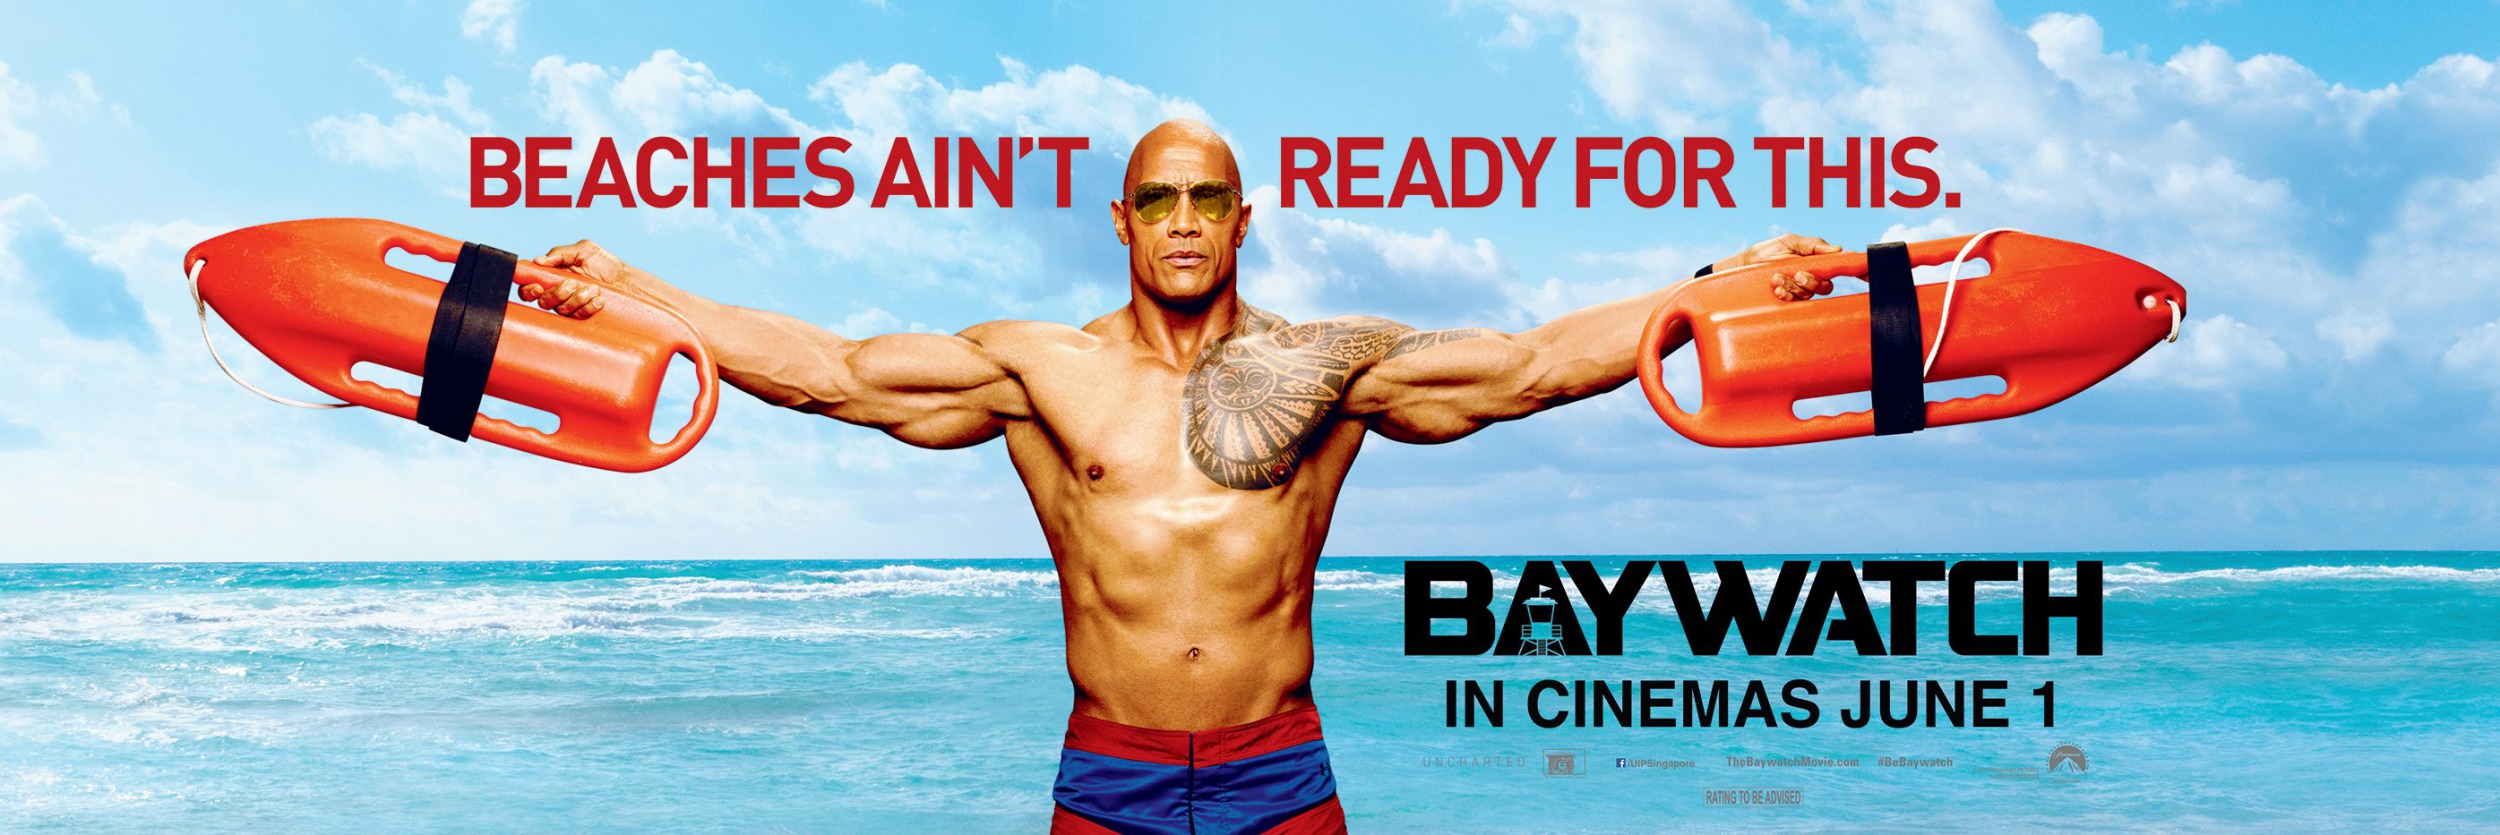 Mega Sized Movie Poster Image for Baywatch (#16 of 17)